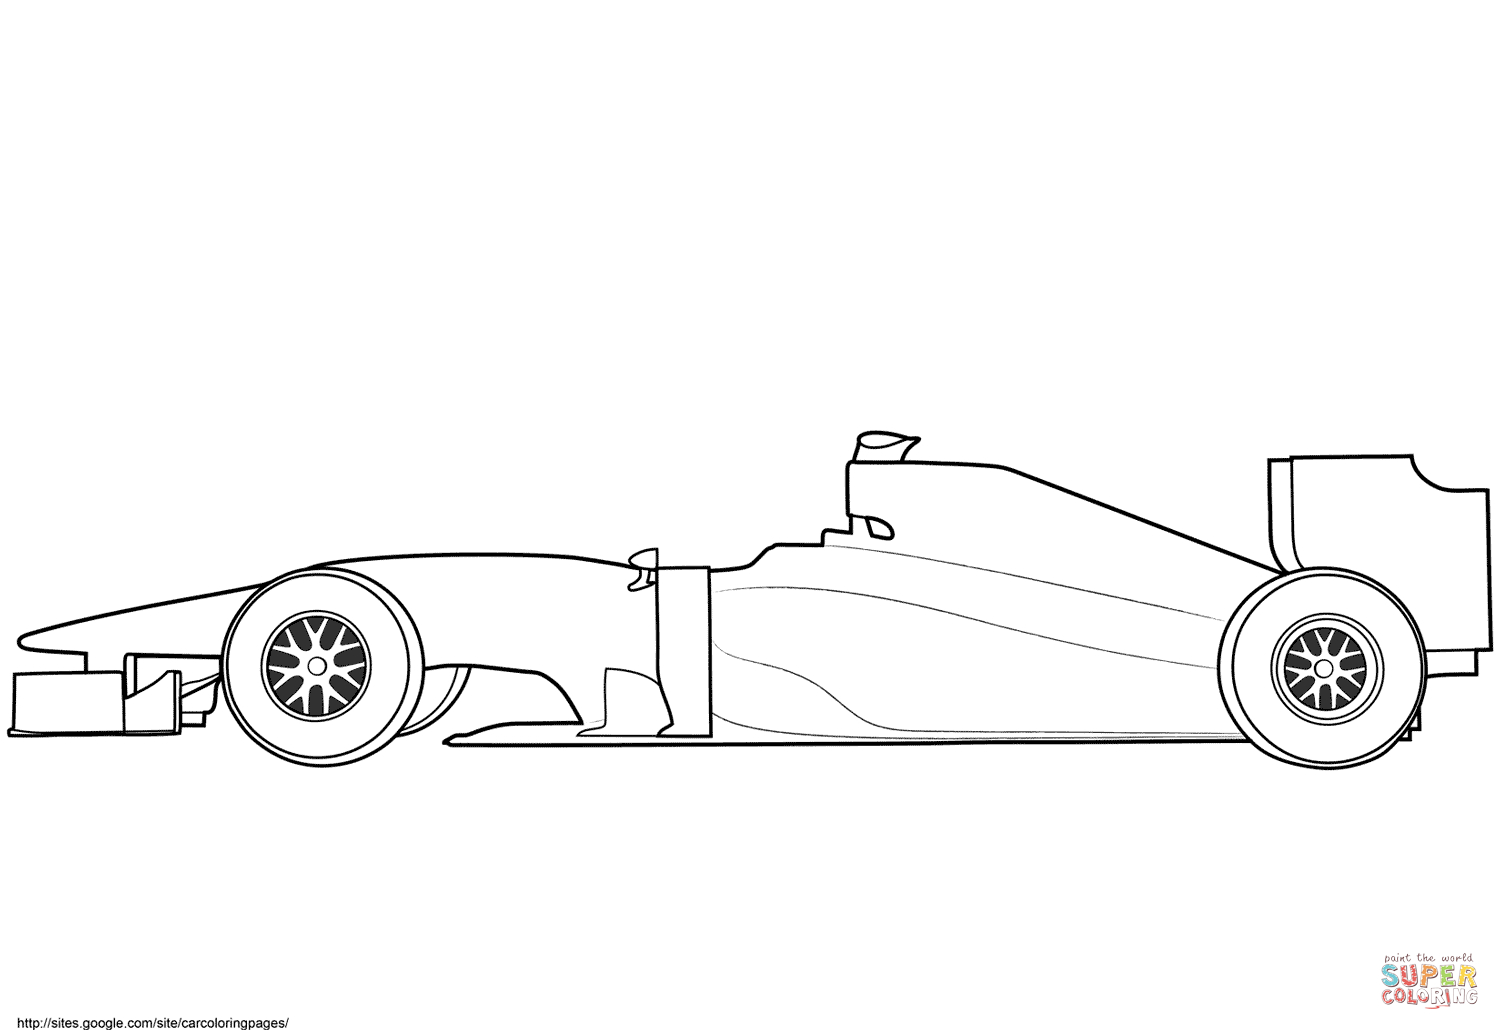 Blank Formula 1 Race Car Coloring Page | Free Printable With Blank Race Car Templates